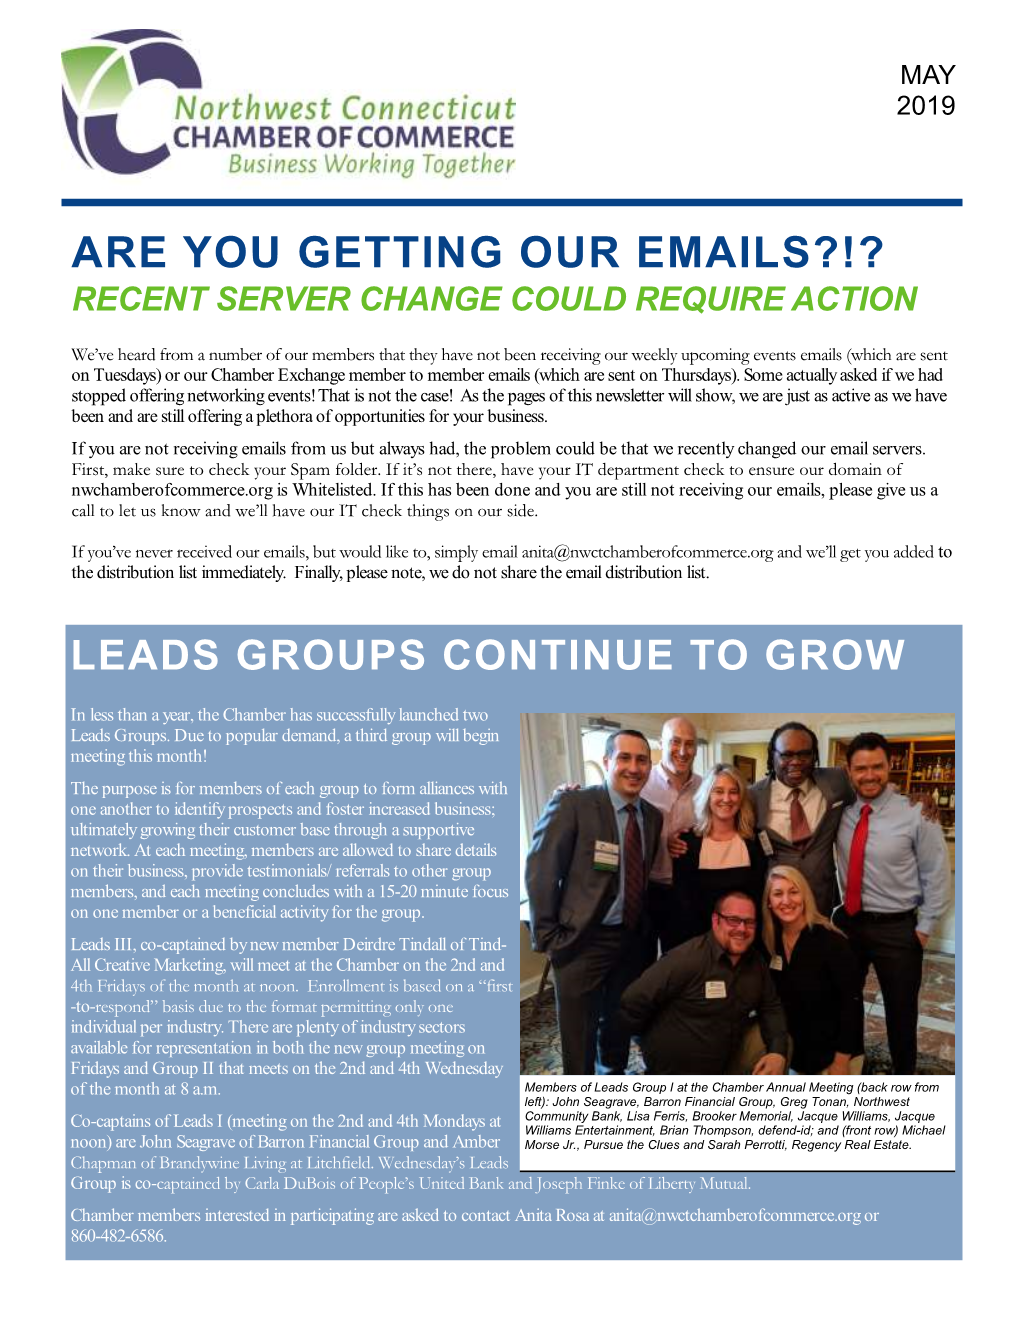 2019 May Newsletter